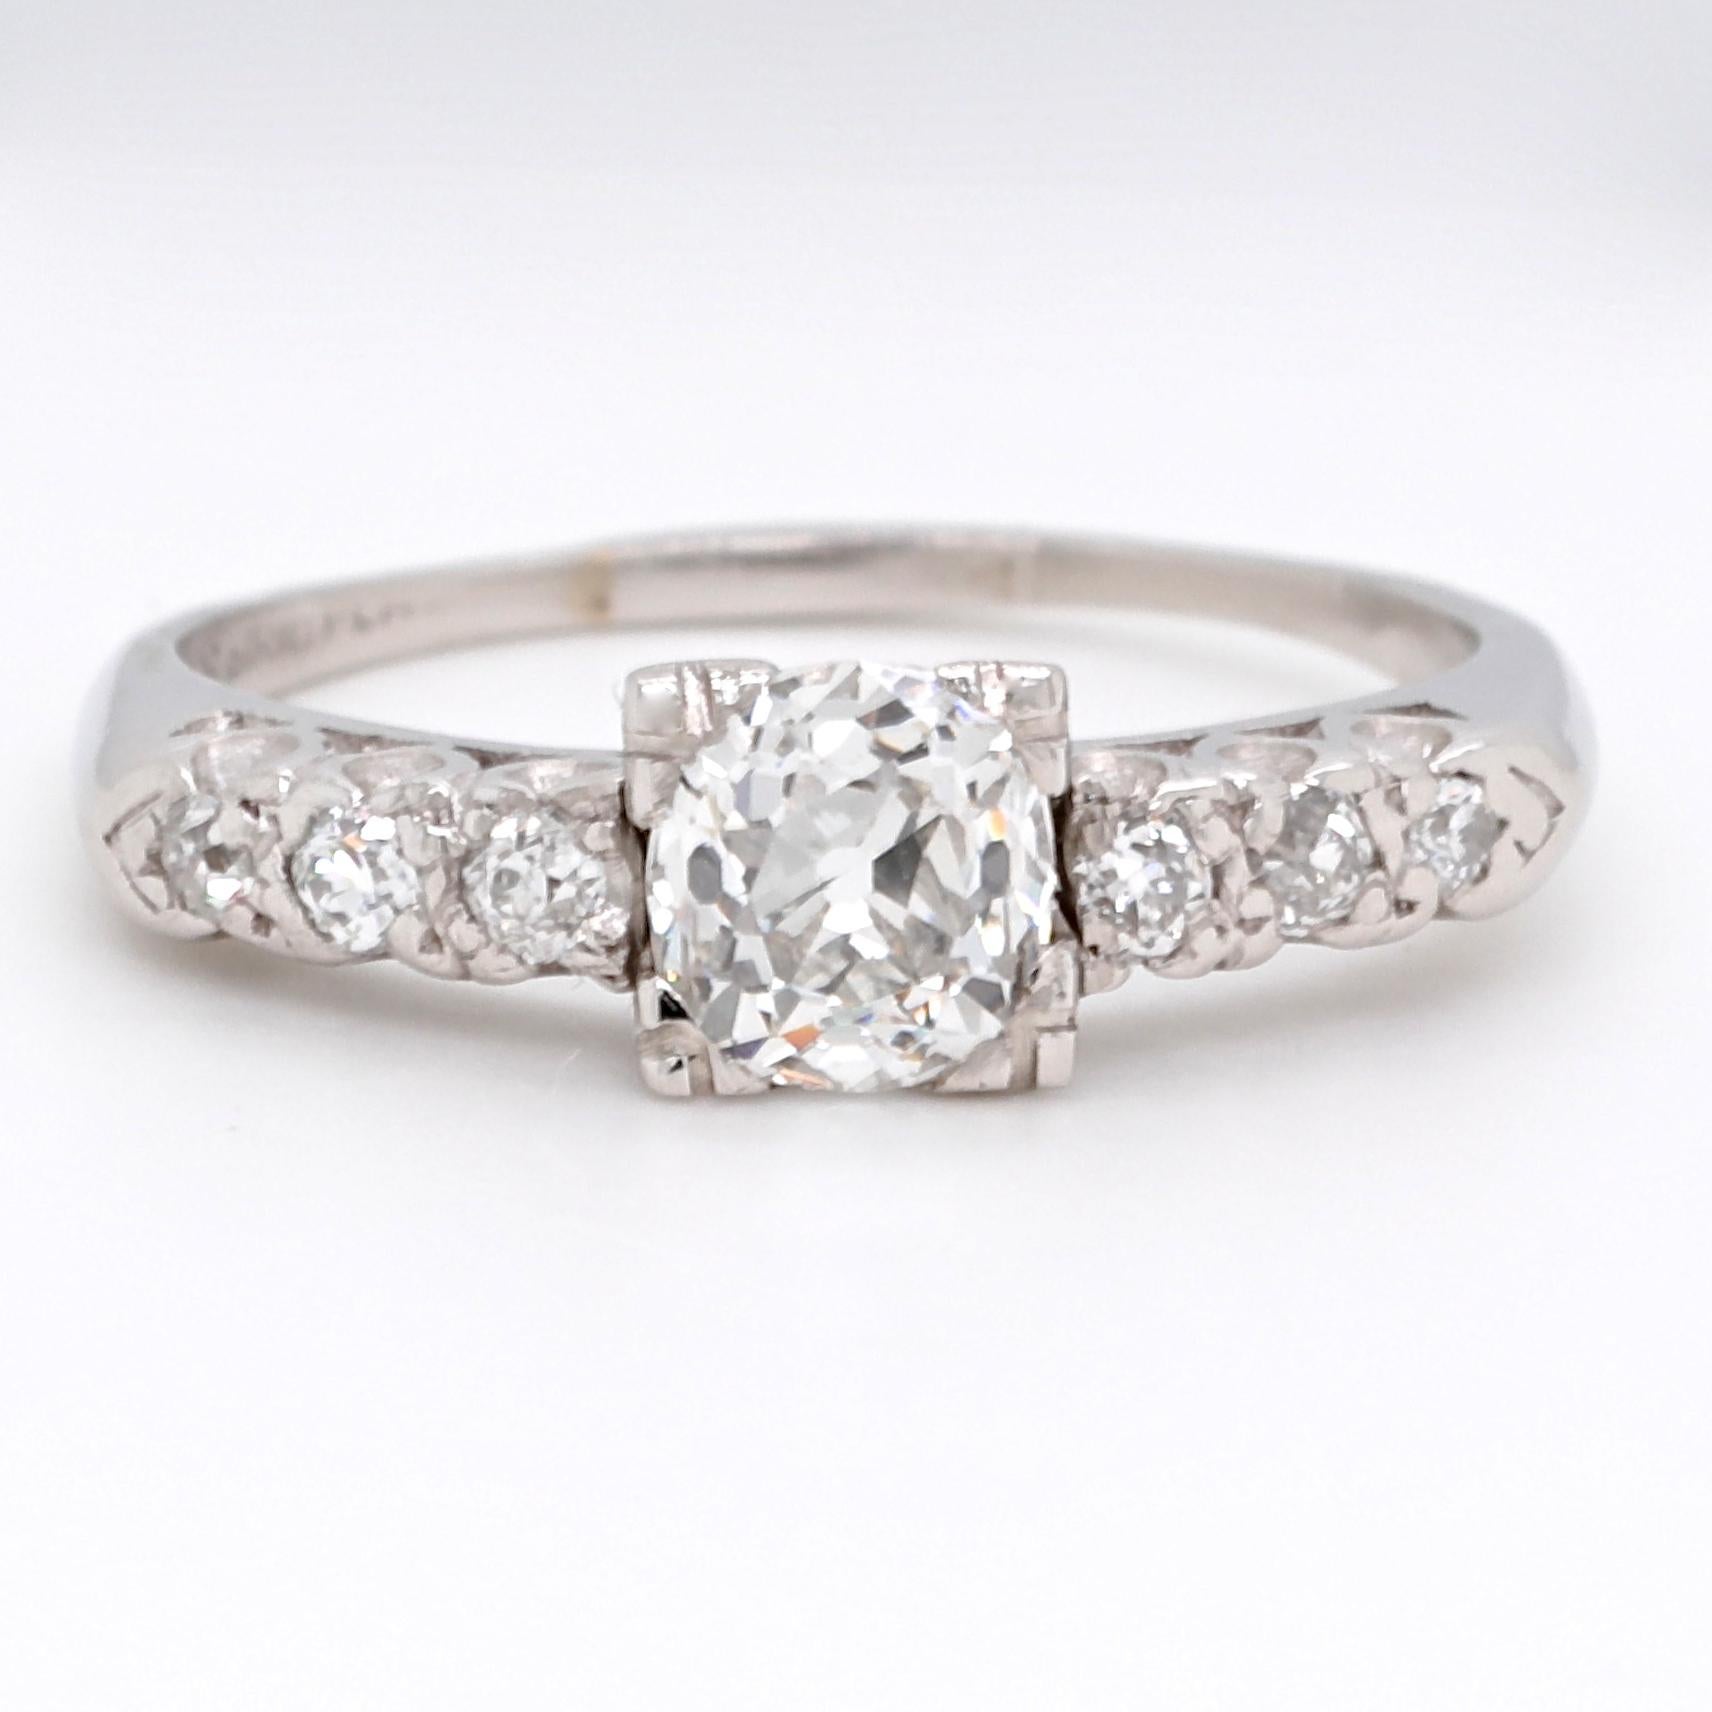 Are you looking for the perfect engagement ring? This timeless, classic beauty might be the one.  A symbol of true love, that's perfect for everyday wear. This is a Late Art Deco Diamond Platinum Ring. The center diamond is an old European cut,